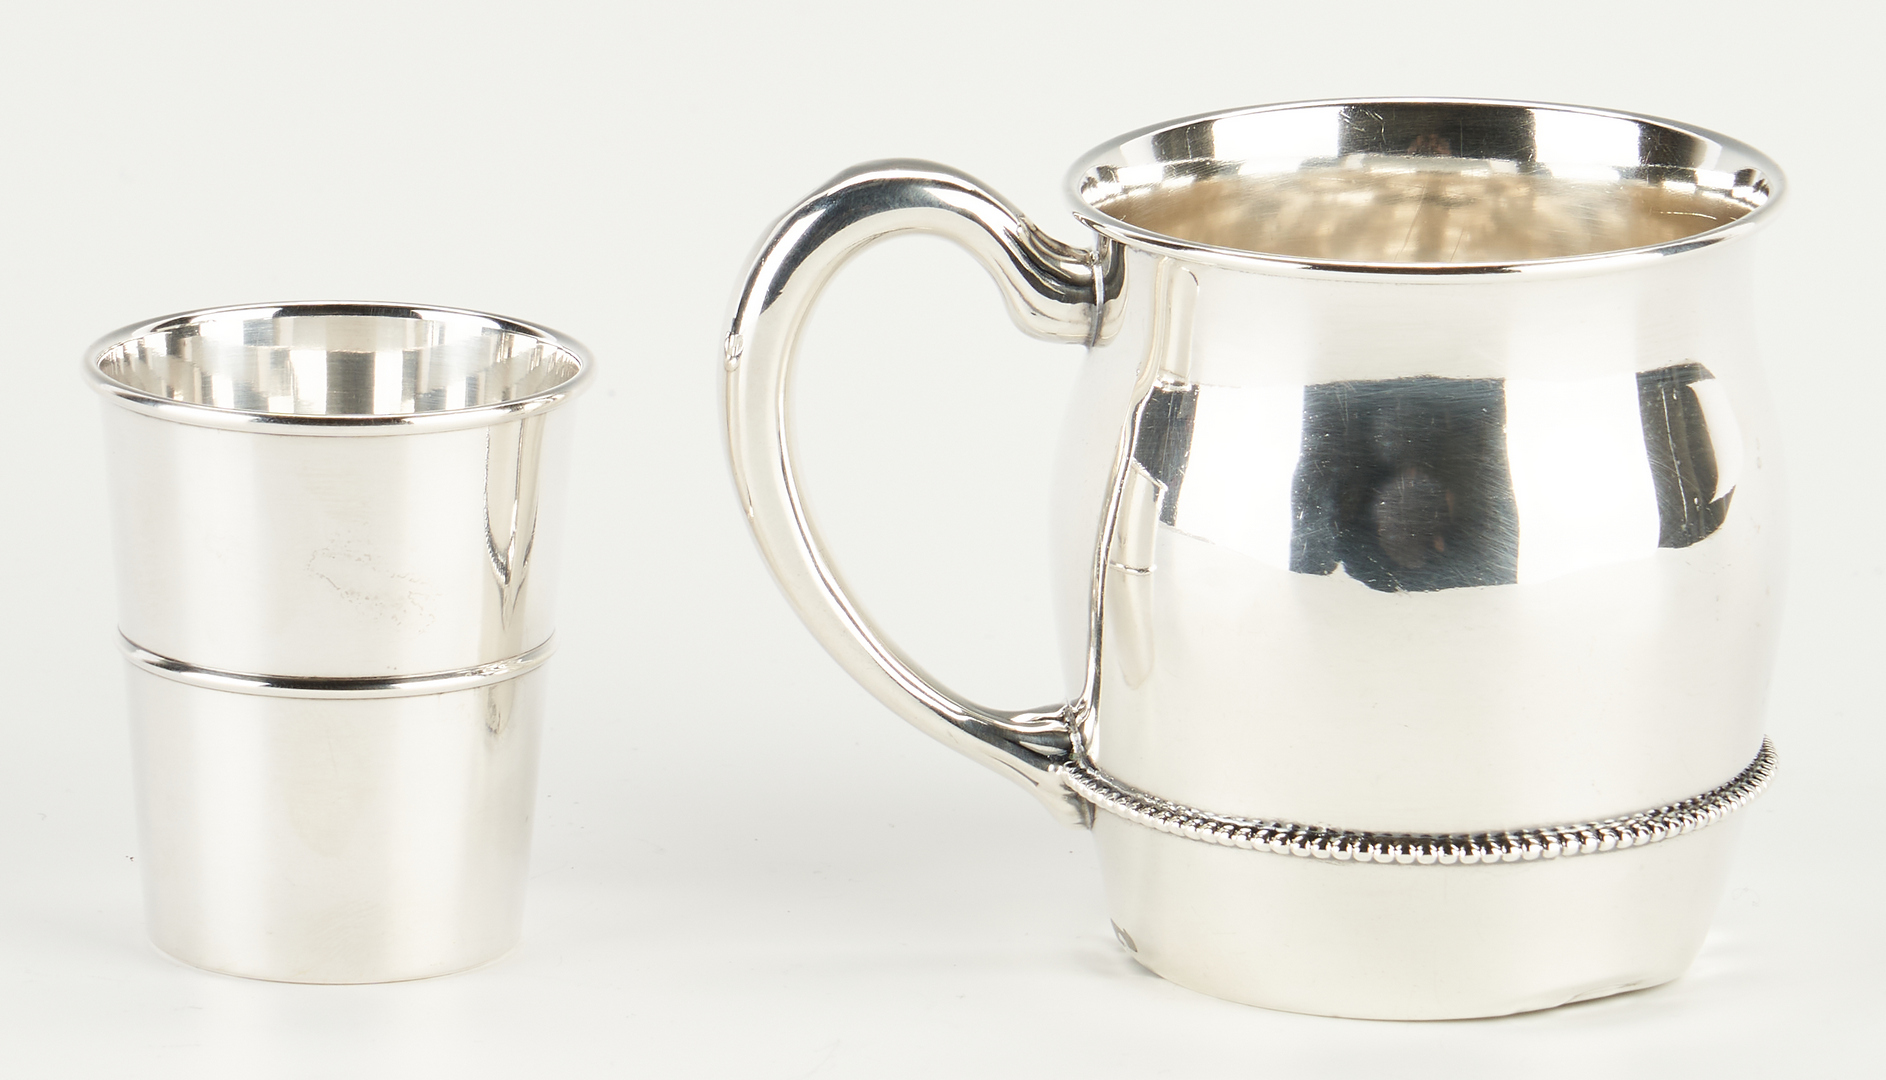 Lot 912: Grouping of 15 Sterling Silver Items, incl. Navarre Gravy Boat